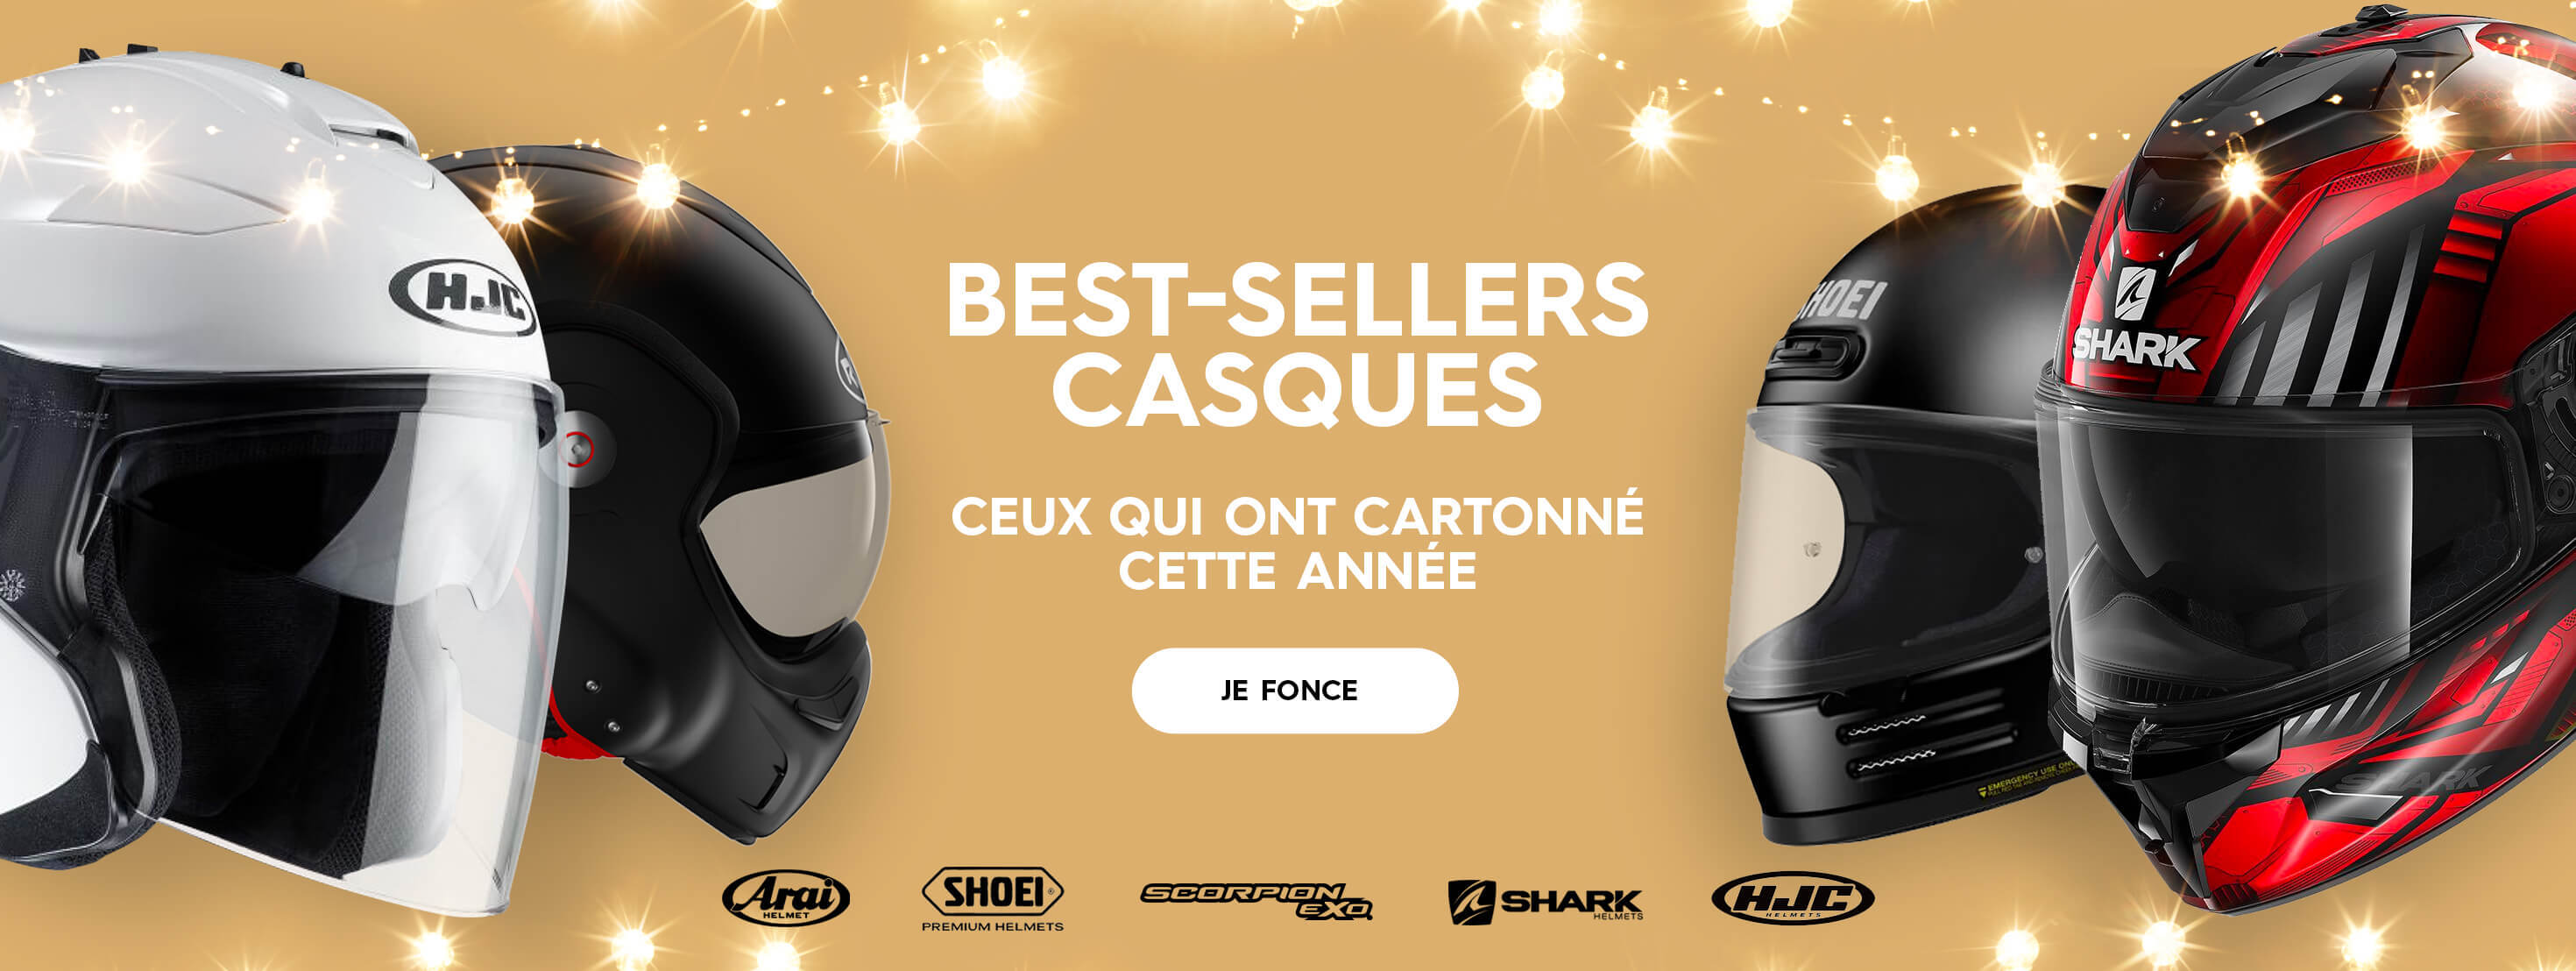 Best sellers casques